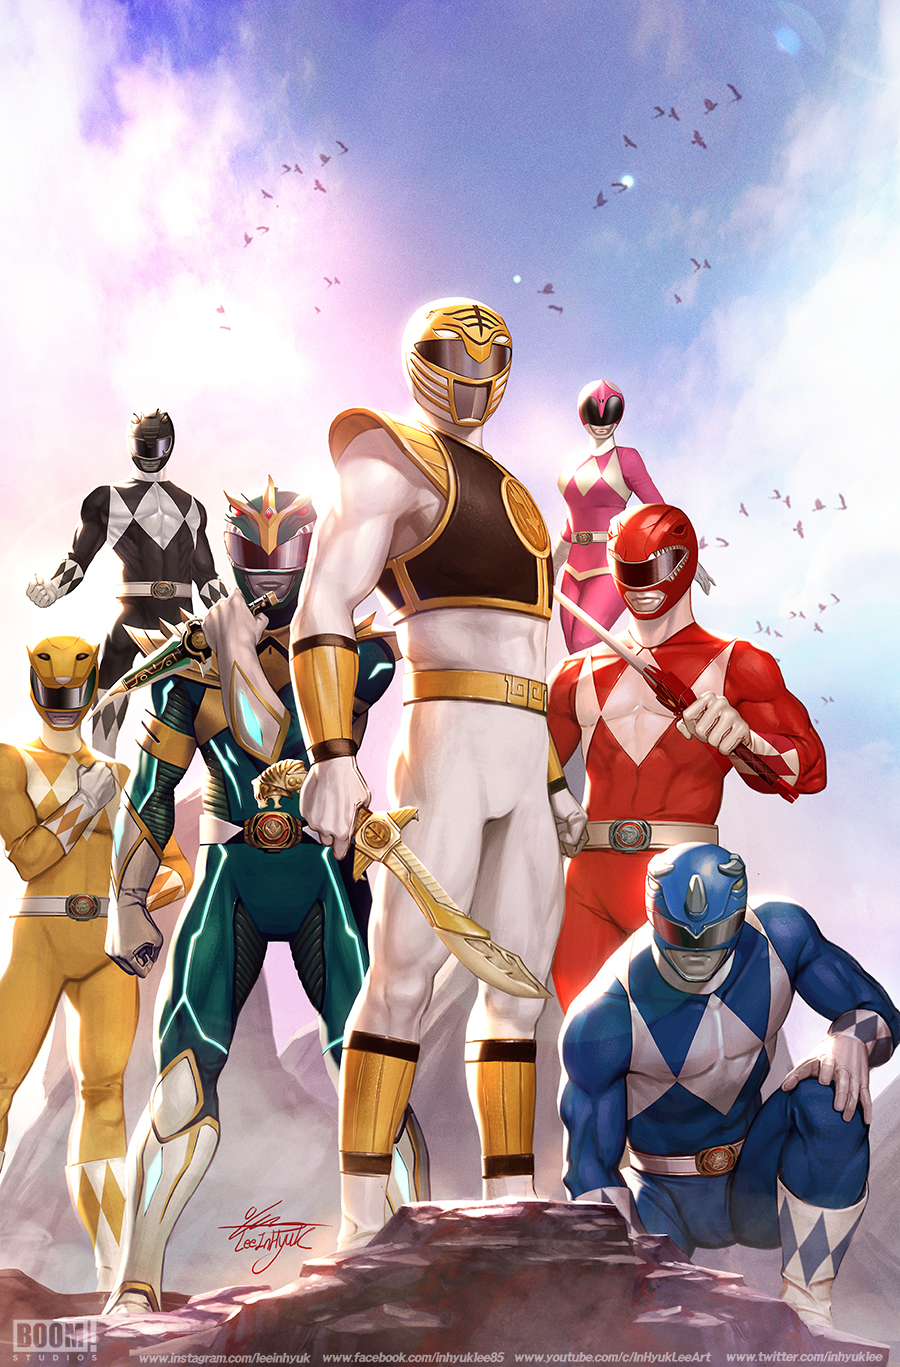 VG and Anime Rangers #1 - Mighty Morphin by NeonStudioKnightZone